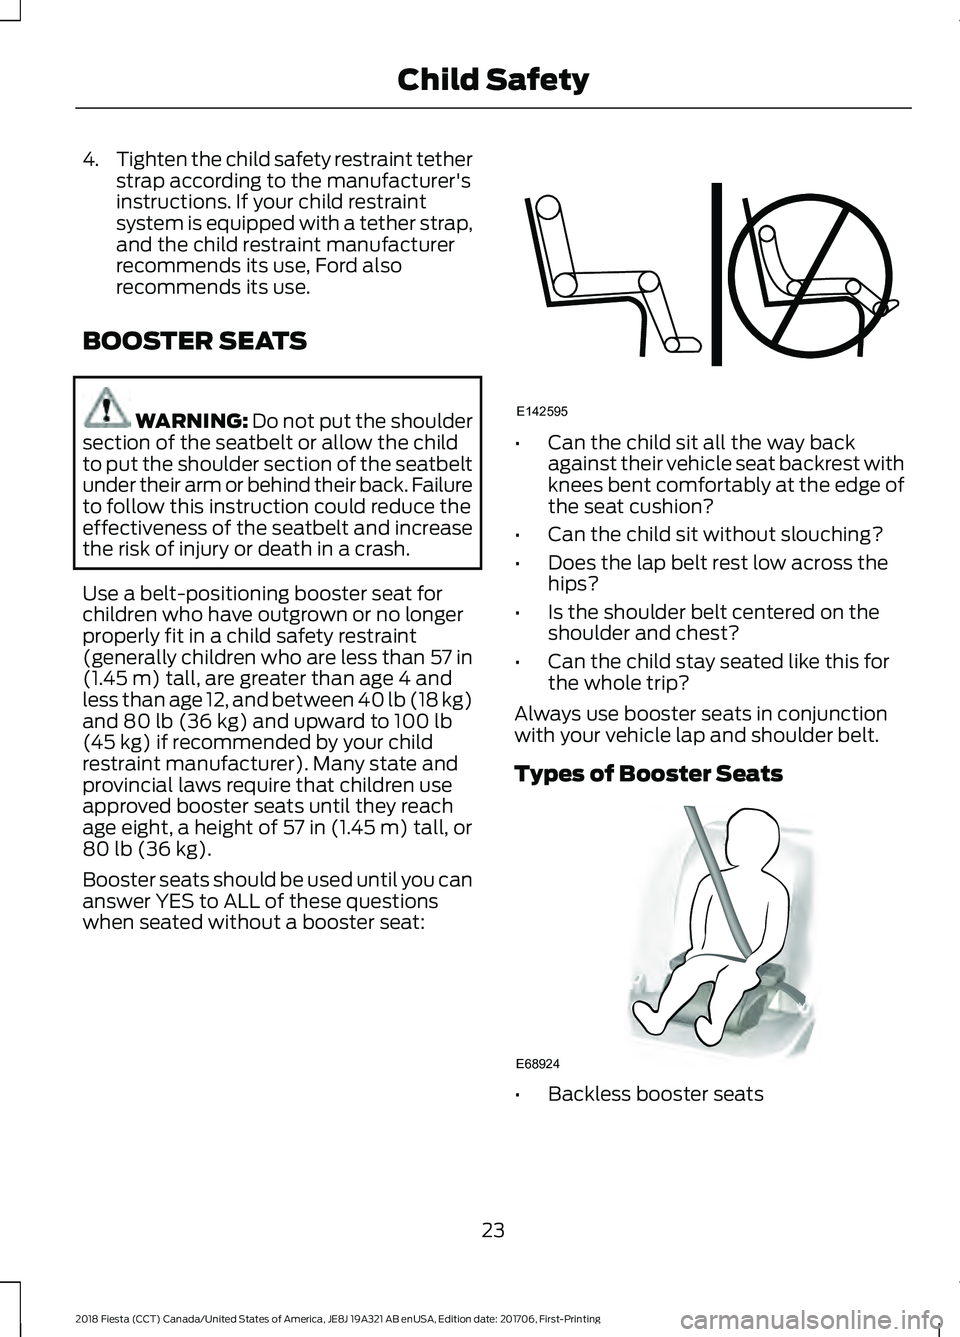 FORD FIESTA 2018  Owners Manual 4.
Tighten the child safety restraint tether
strap according to the manufacturer's
instructions. If your child restraint
system is equipped with a tether strap,
and the child restraint manufacture